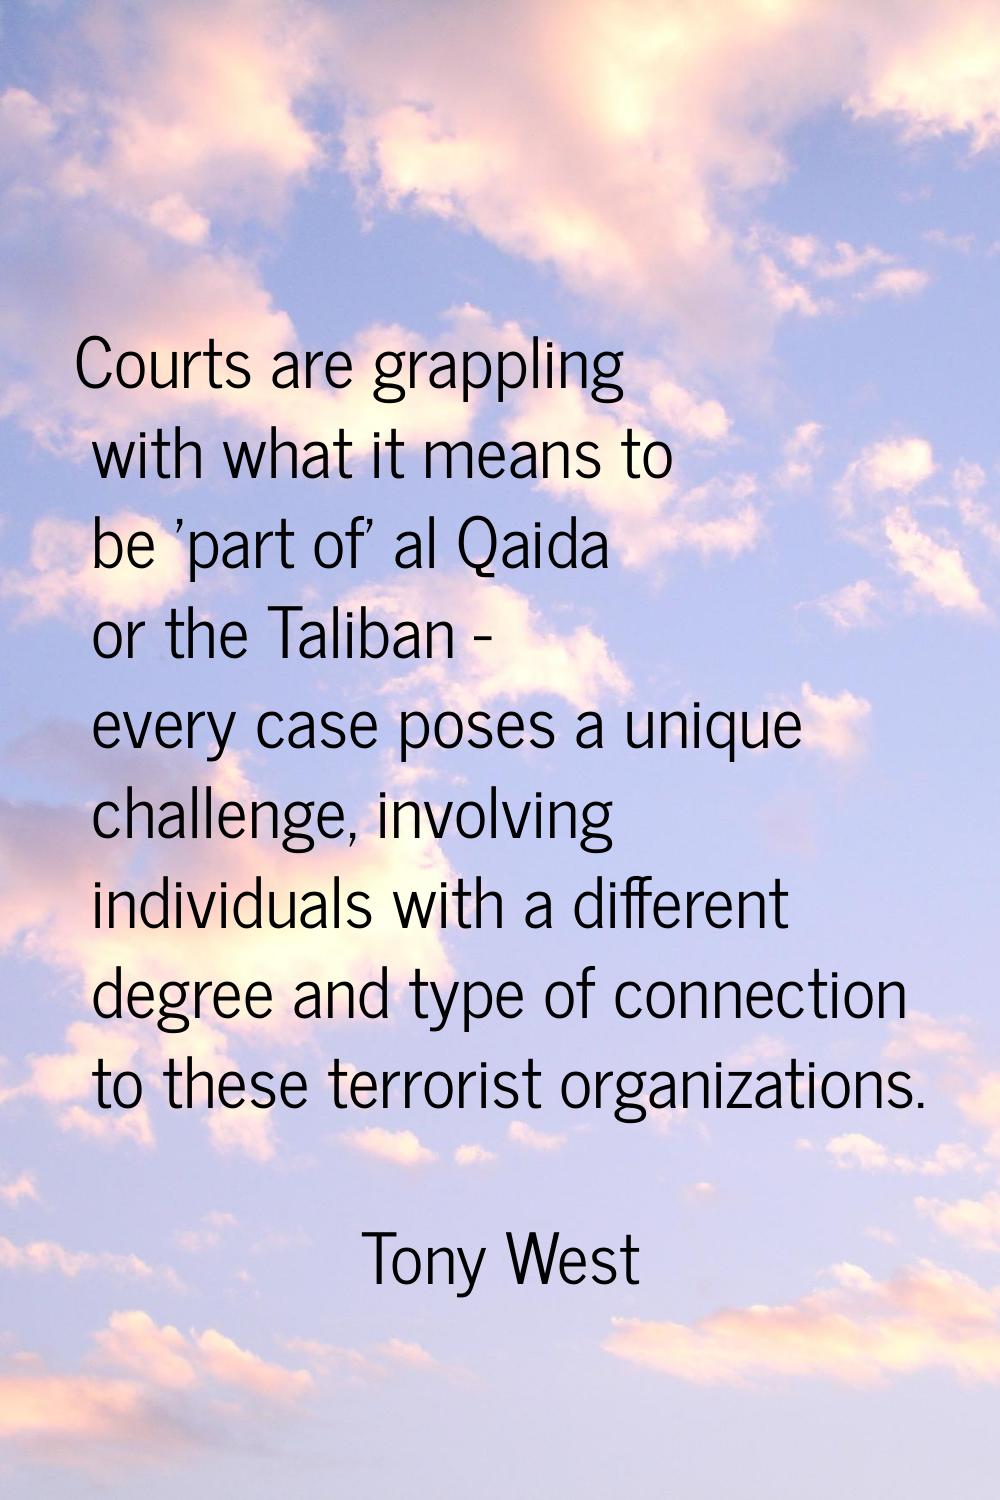 Courts are grappling with what it means to be 'part of' al Qaida or the Taliban - every case poses 